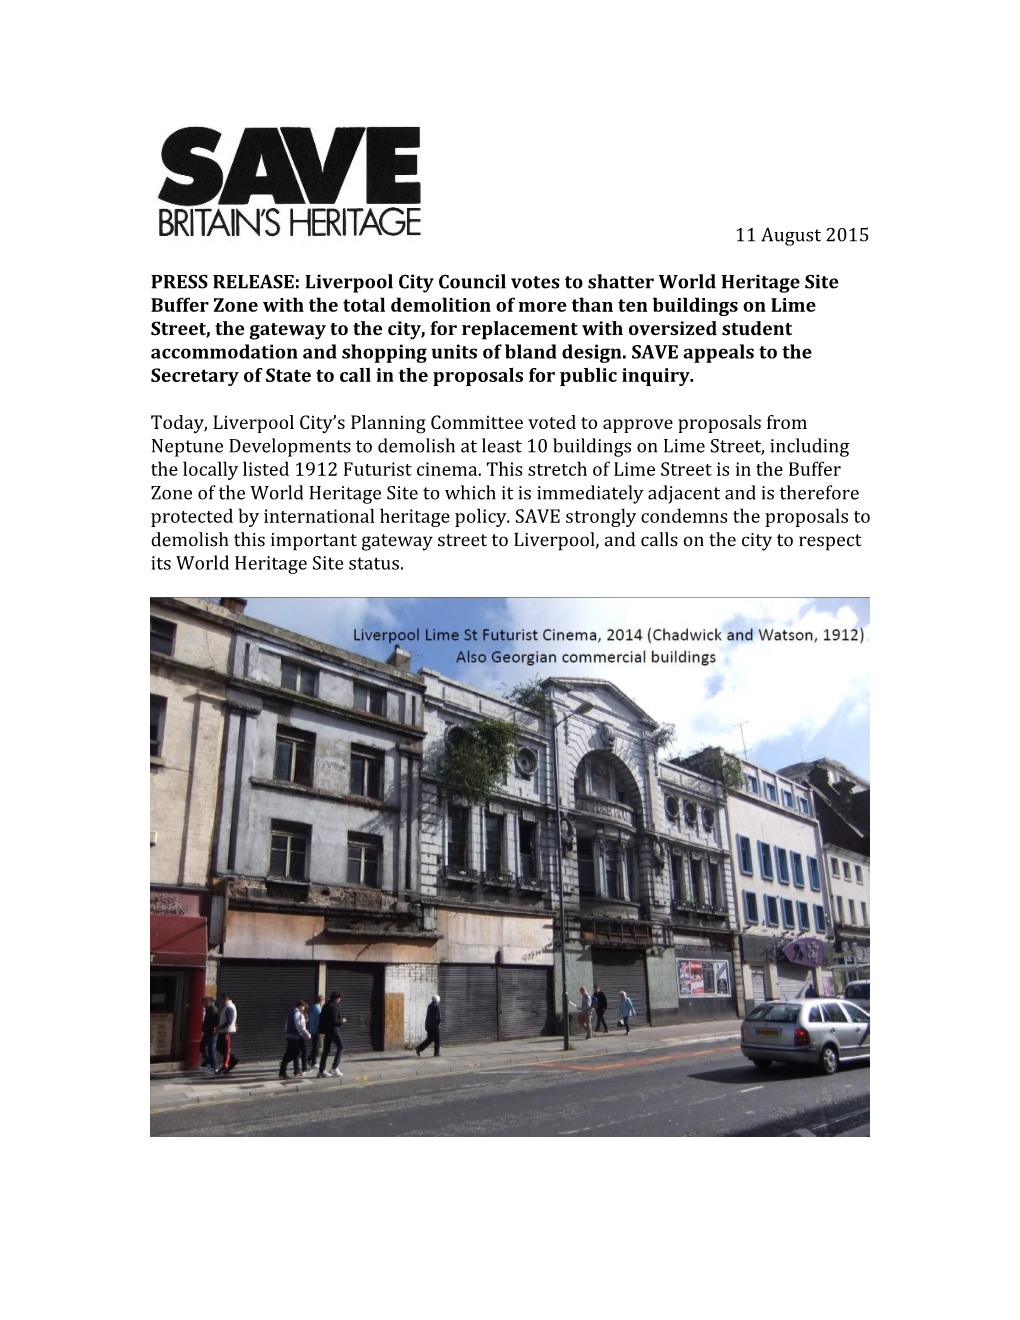 11 August 2015 PRESS RELEASE: Liverpool City Council Votes to Shatter World Heritage Site Buffer Zone with the Total Demolition